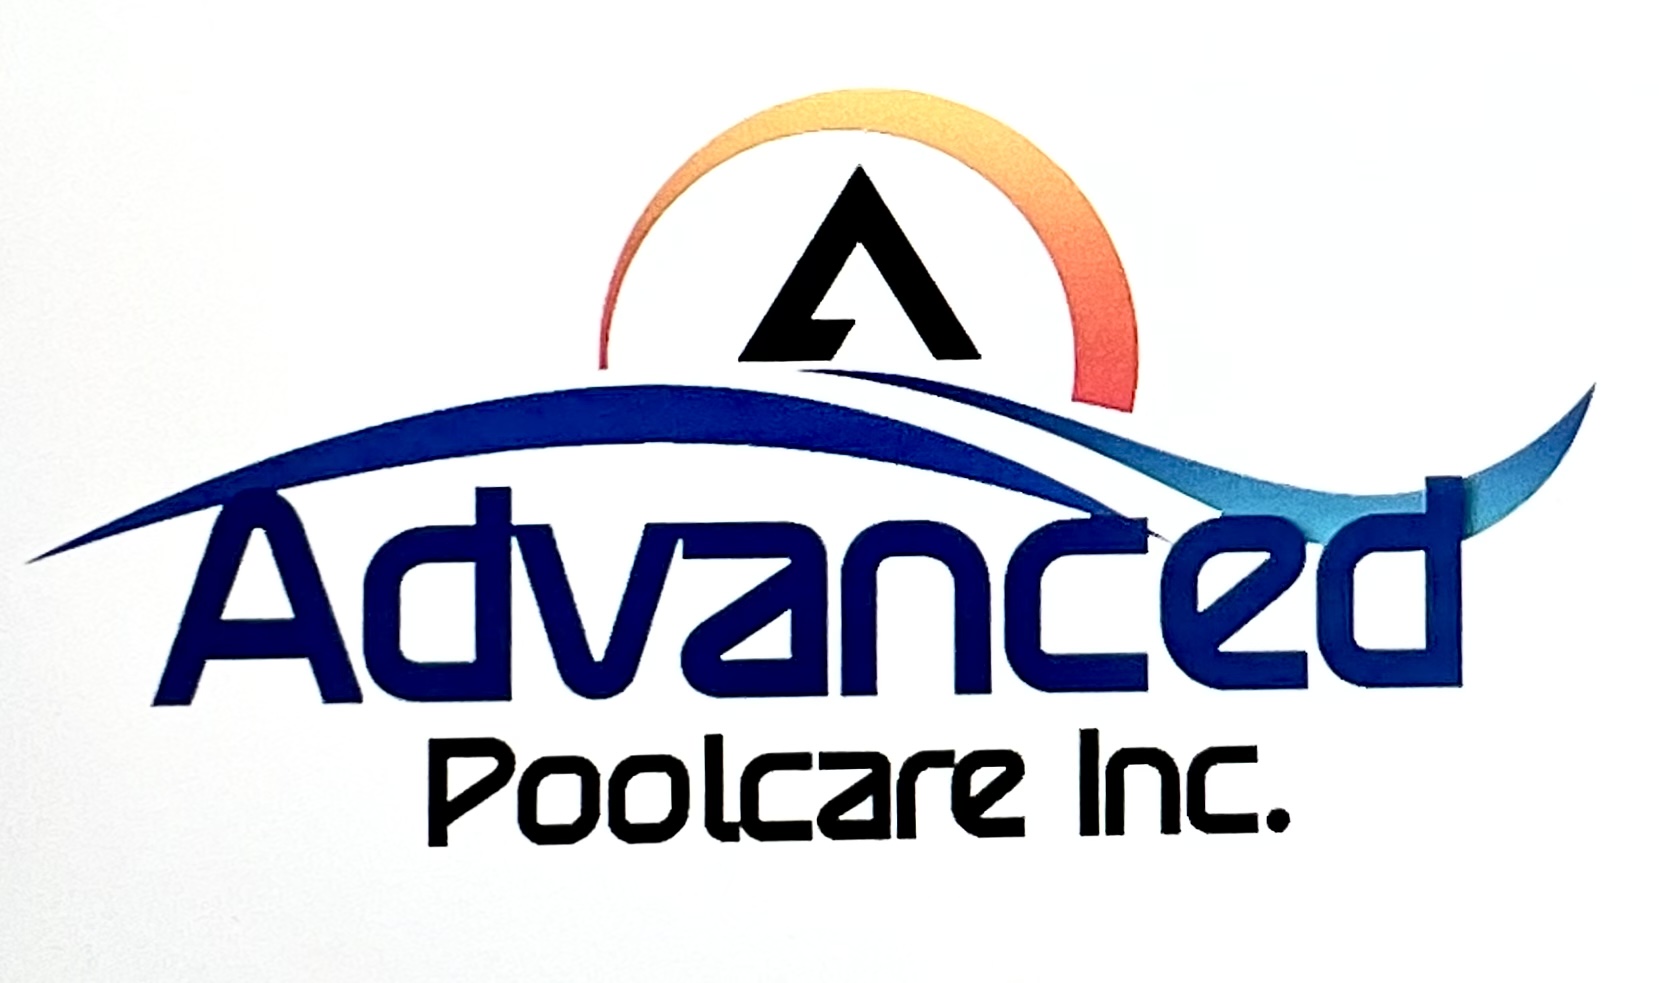 Advanced Poolcare, Inc. 19 S Westside Dr, New Palestine Indiana 46163